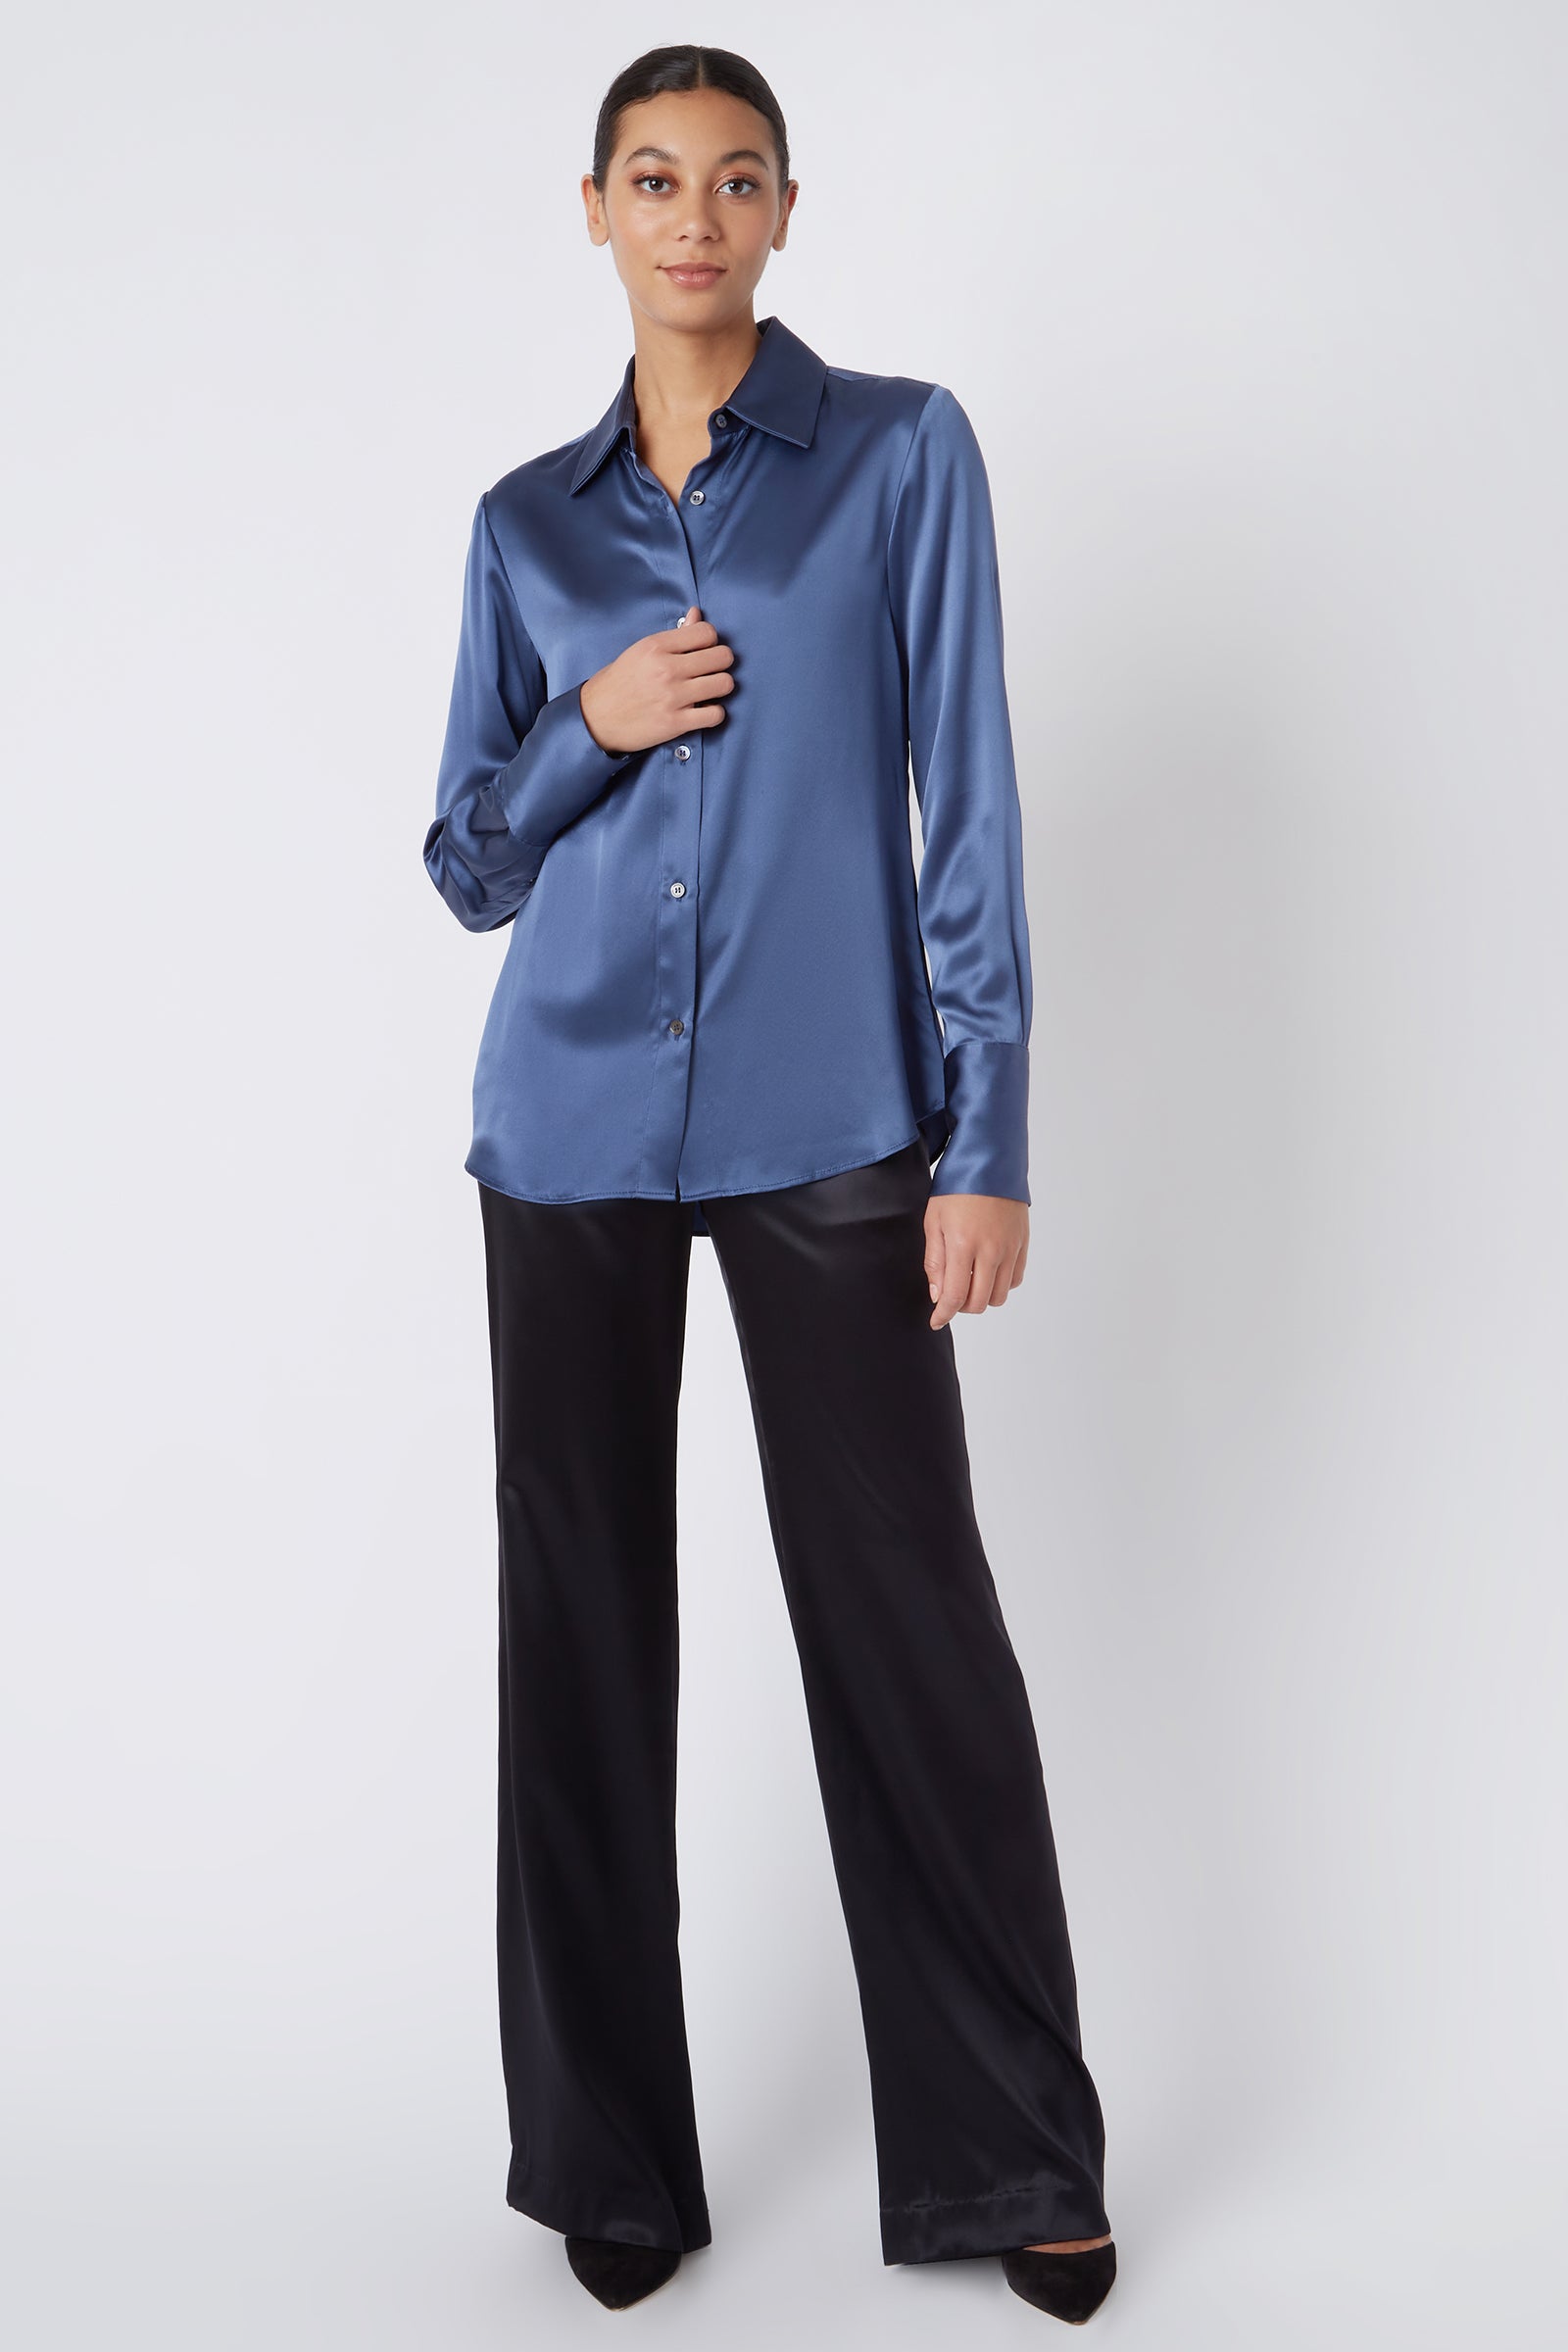 Kal Rieman Classic Tailored Blouse in Dusty Blue Silk on Model Touching Shirt Full Front View